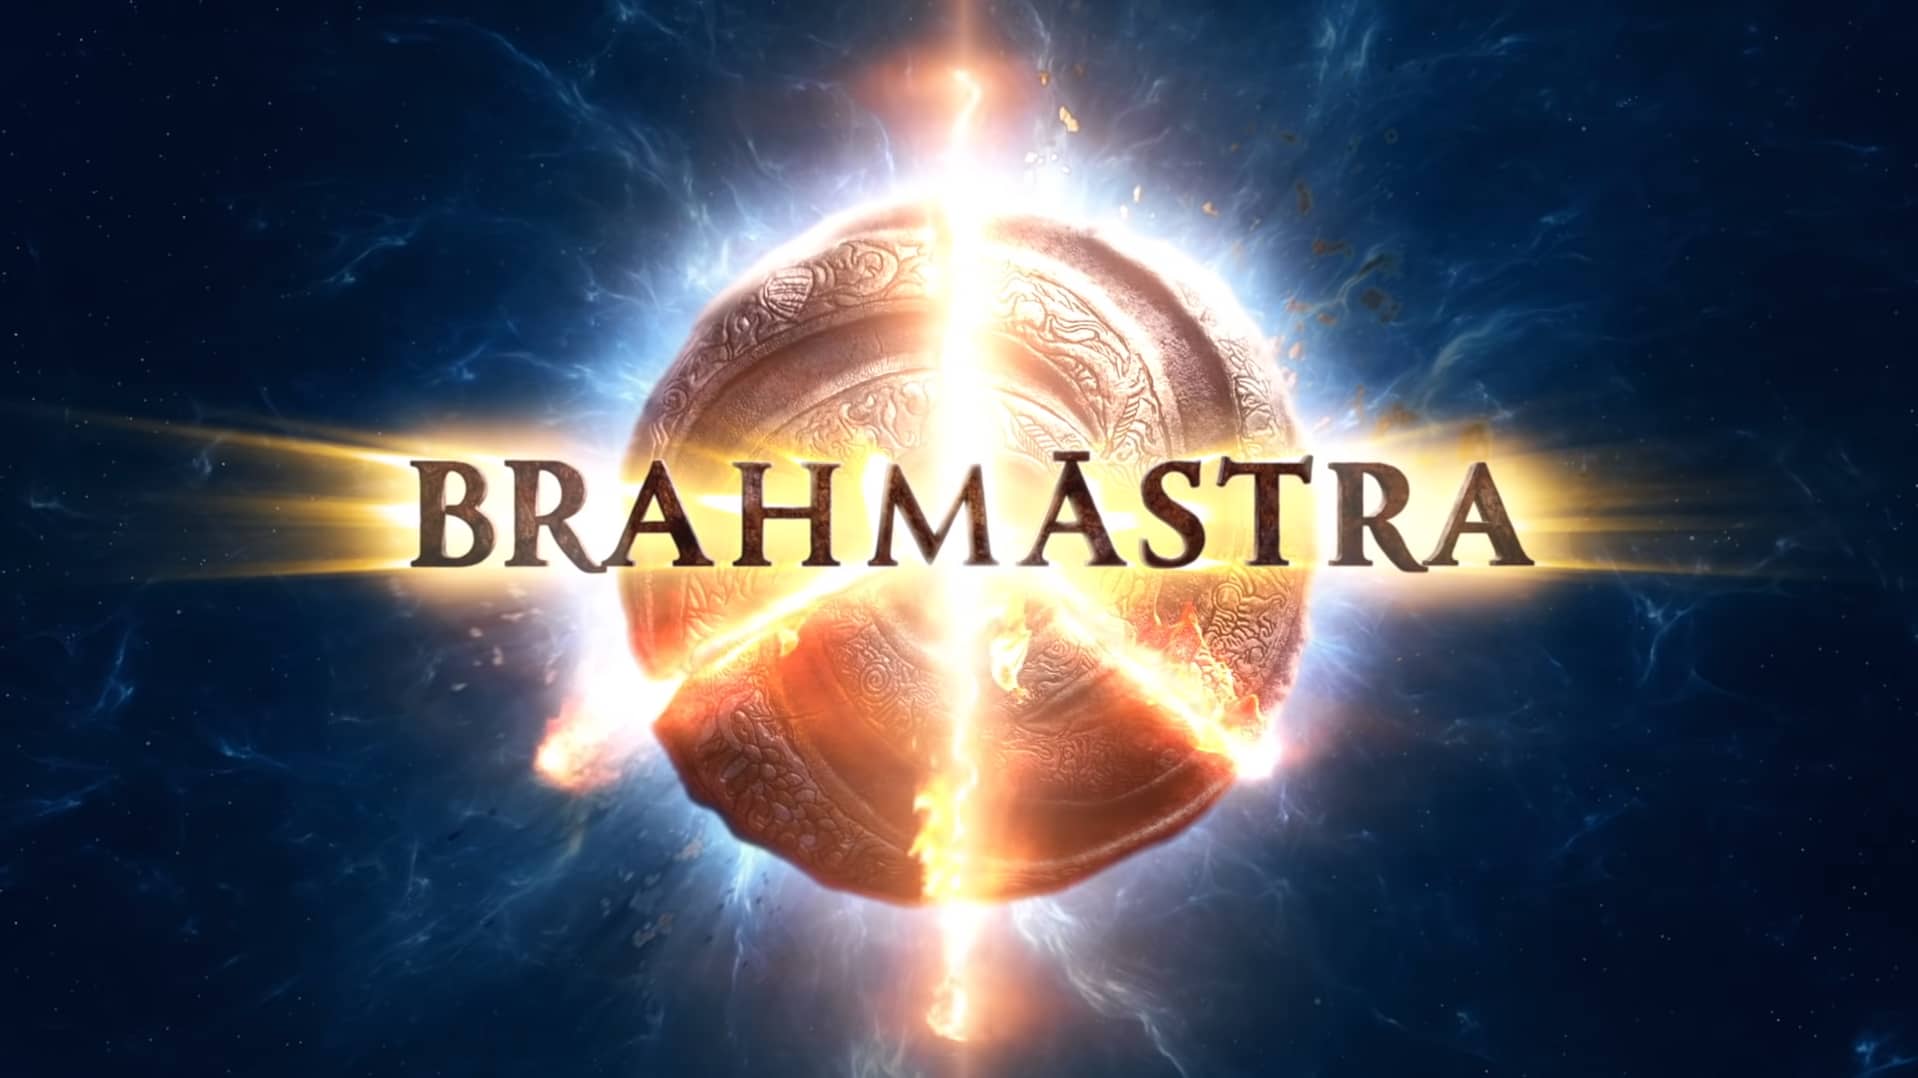 Brahmastra not going to release on this christmas